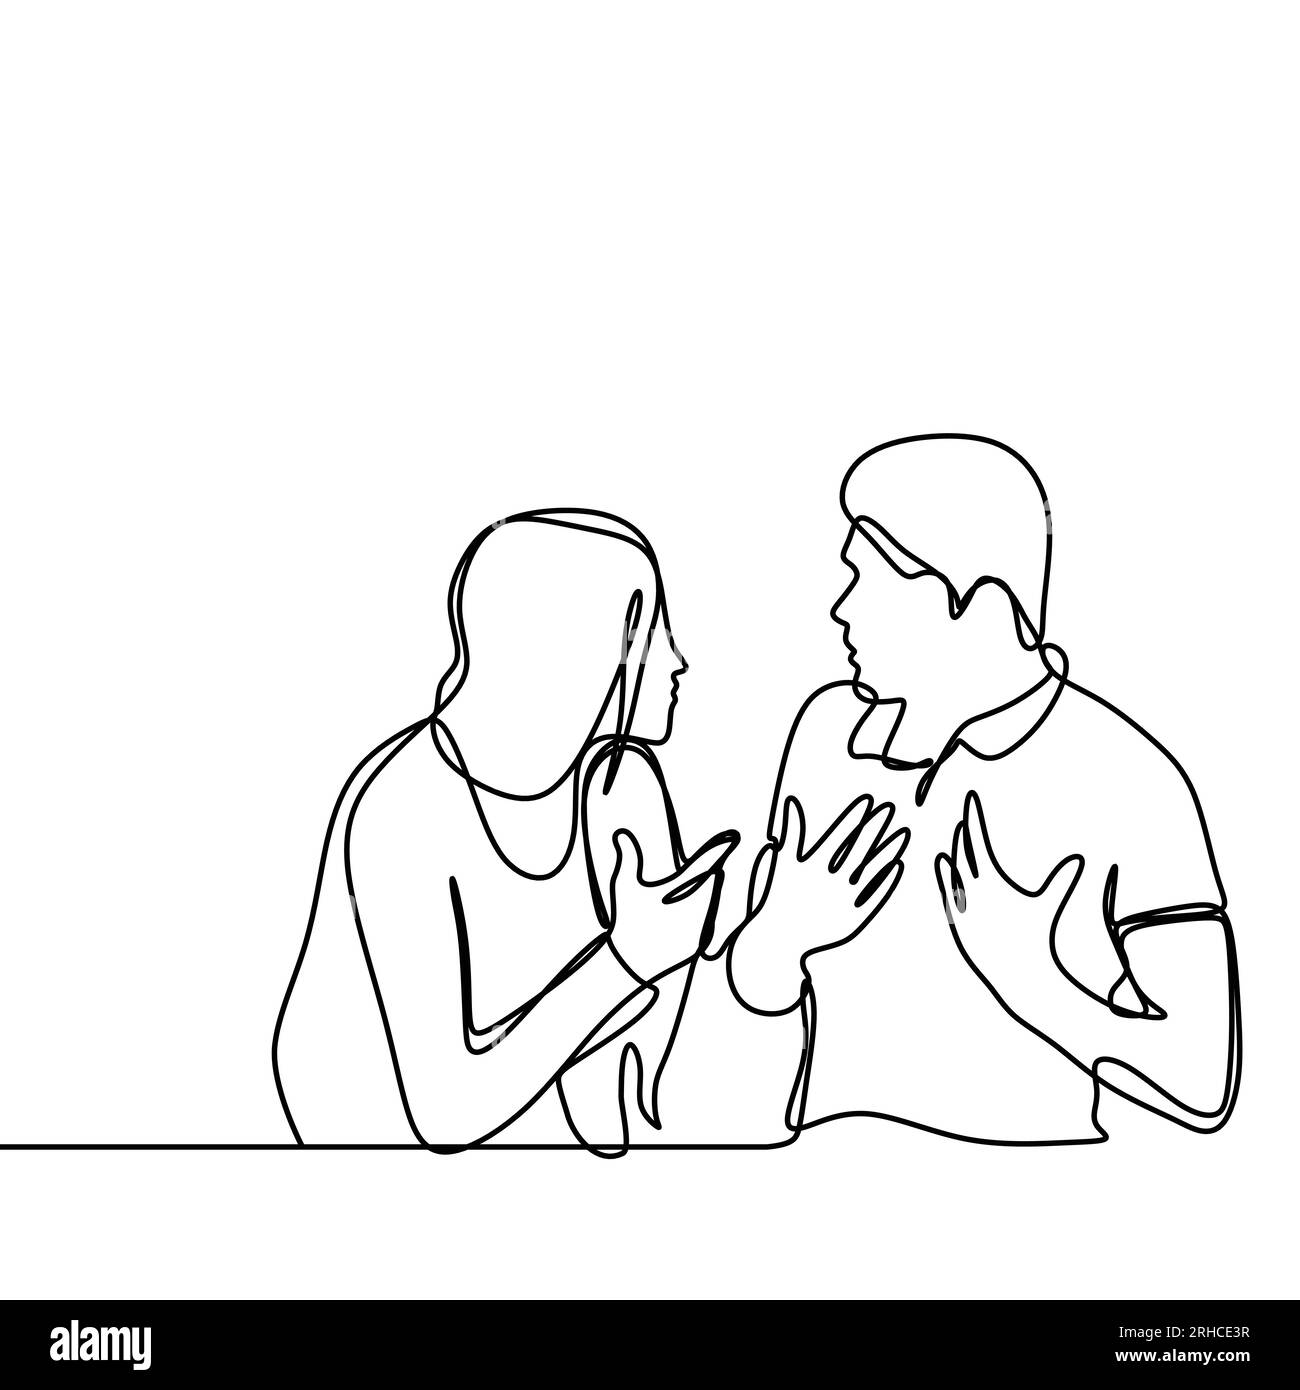 Continuous line drawing of couple in conflict. Man and women talking each other with angry gesture vector illustration isolated on white background. Stock Vector